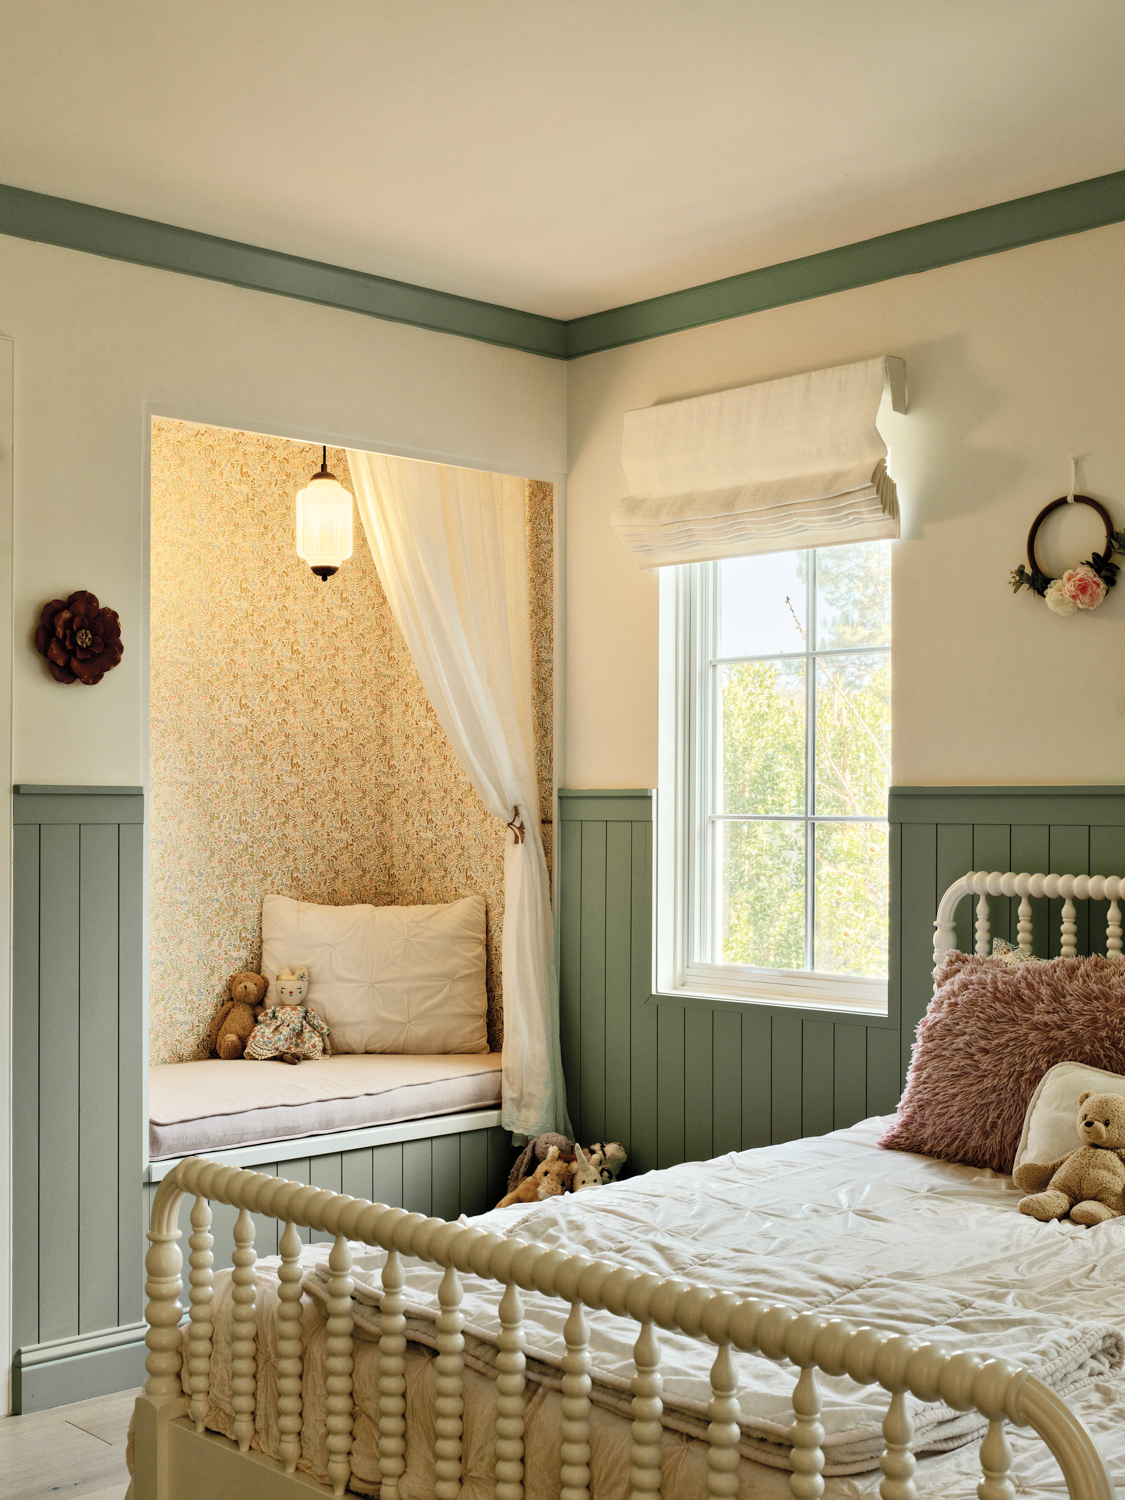 Children’s bedroom with a spindle...